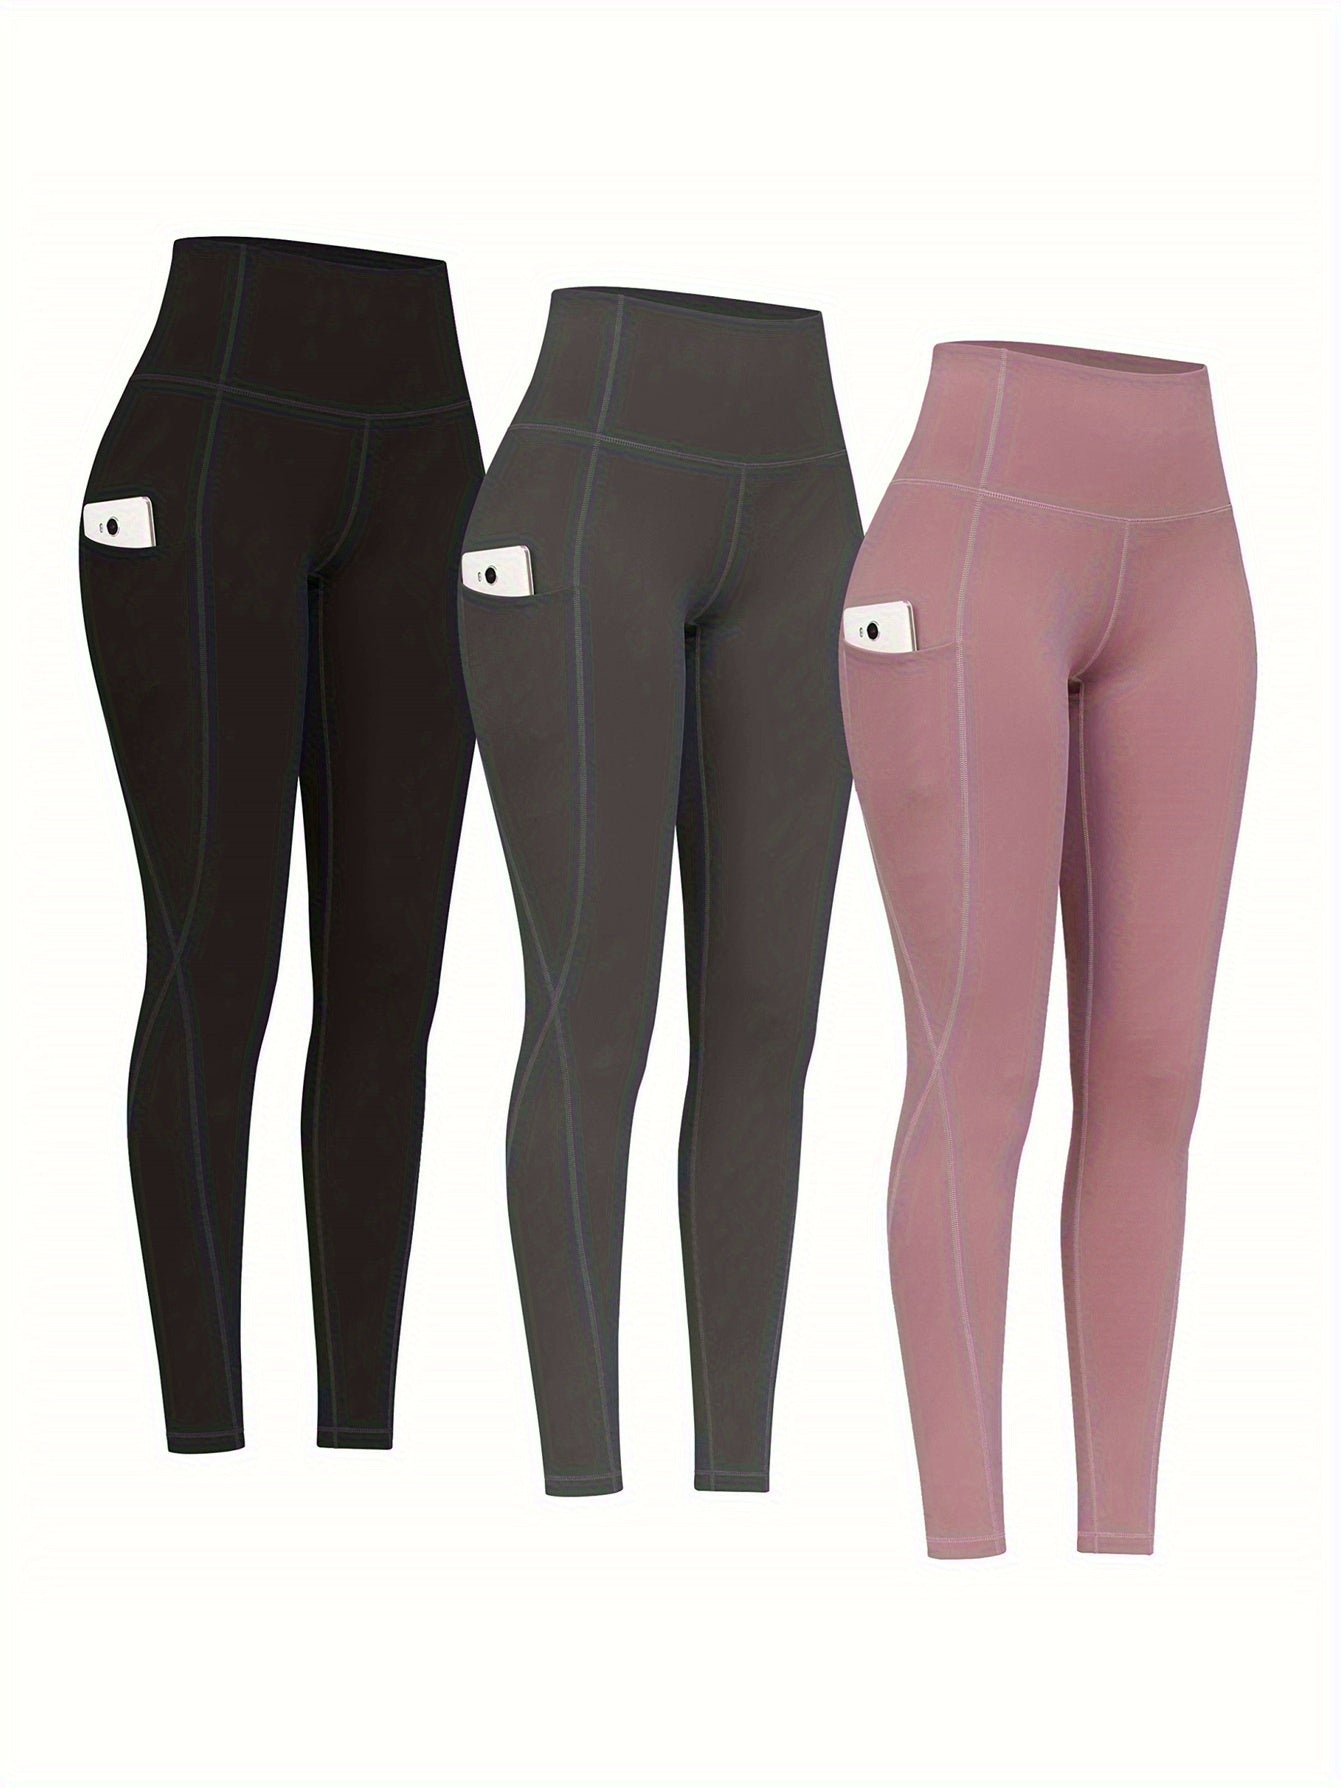 Turn up the summer with high waist leggings armor - CasualFlowshop